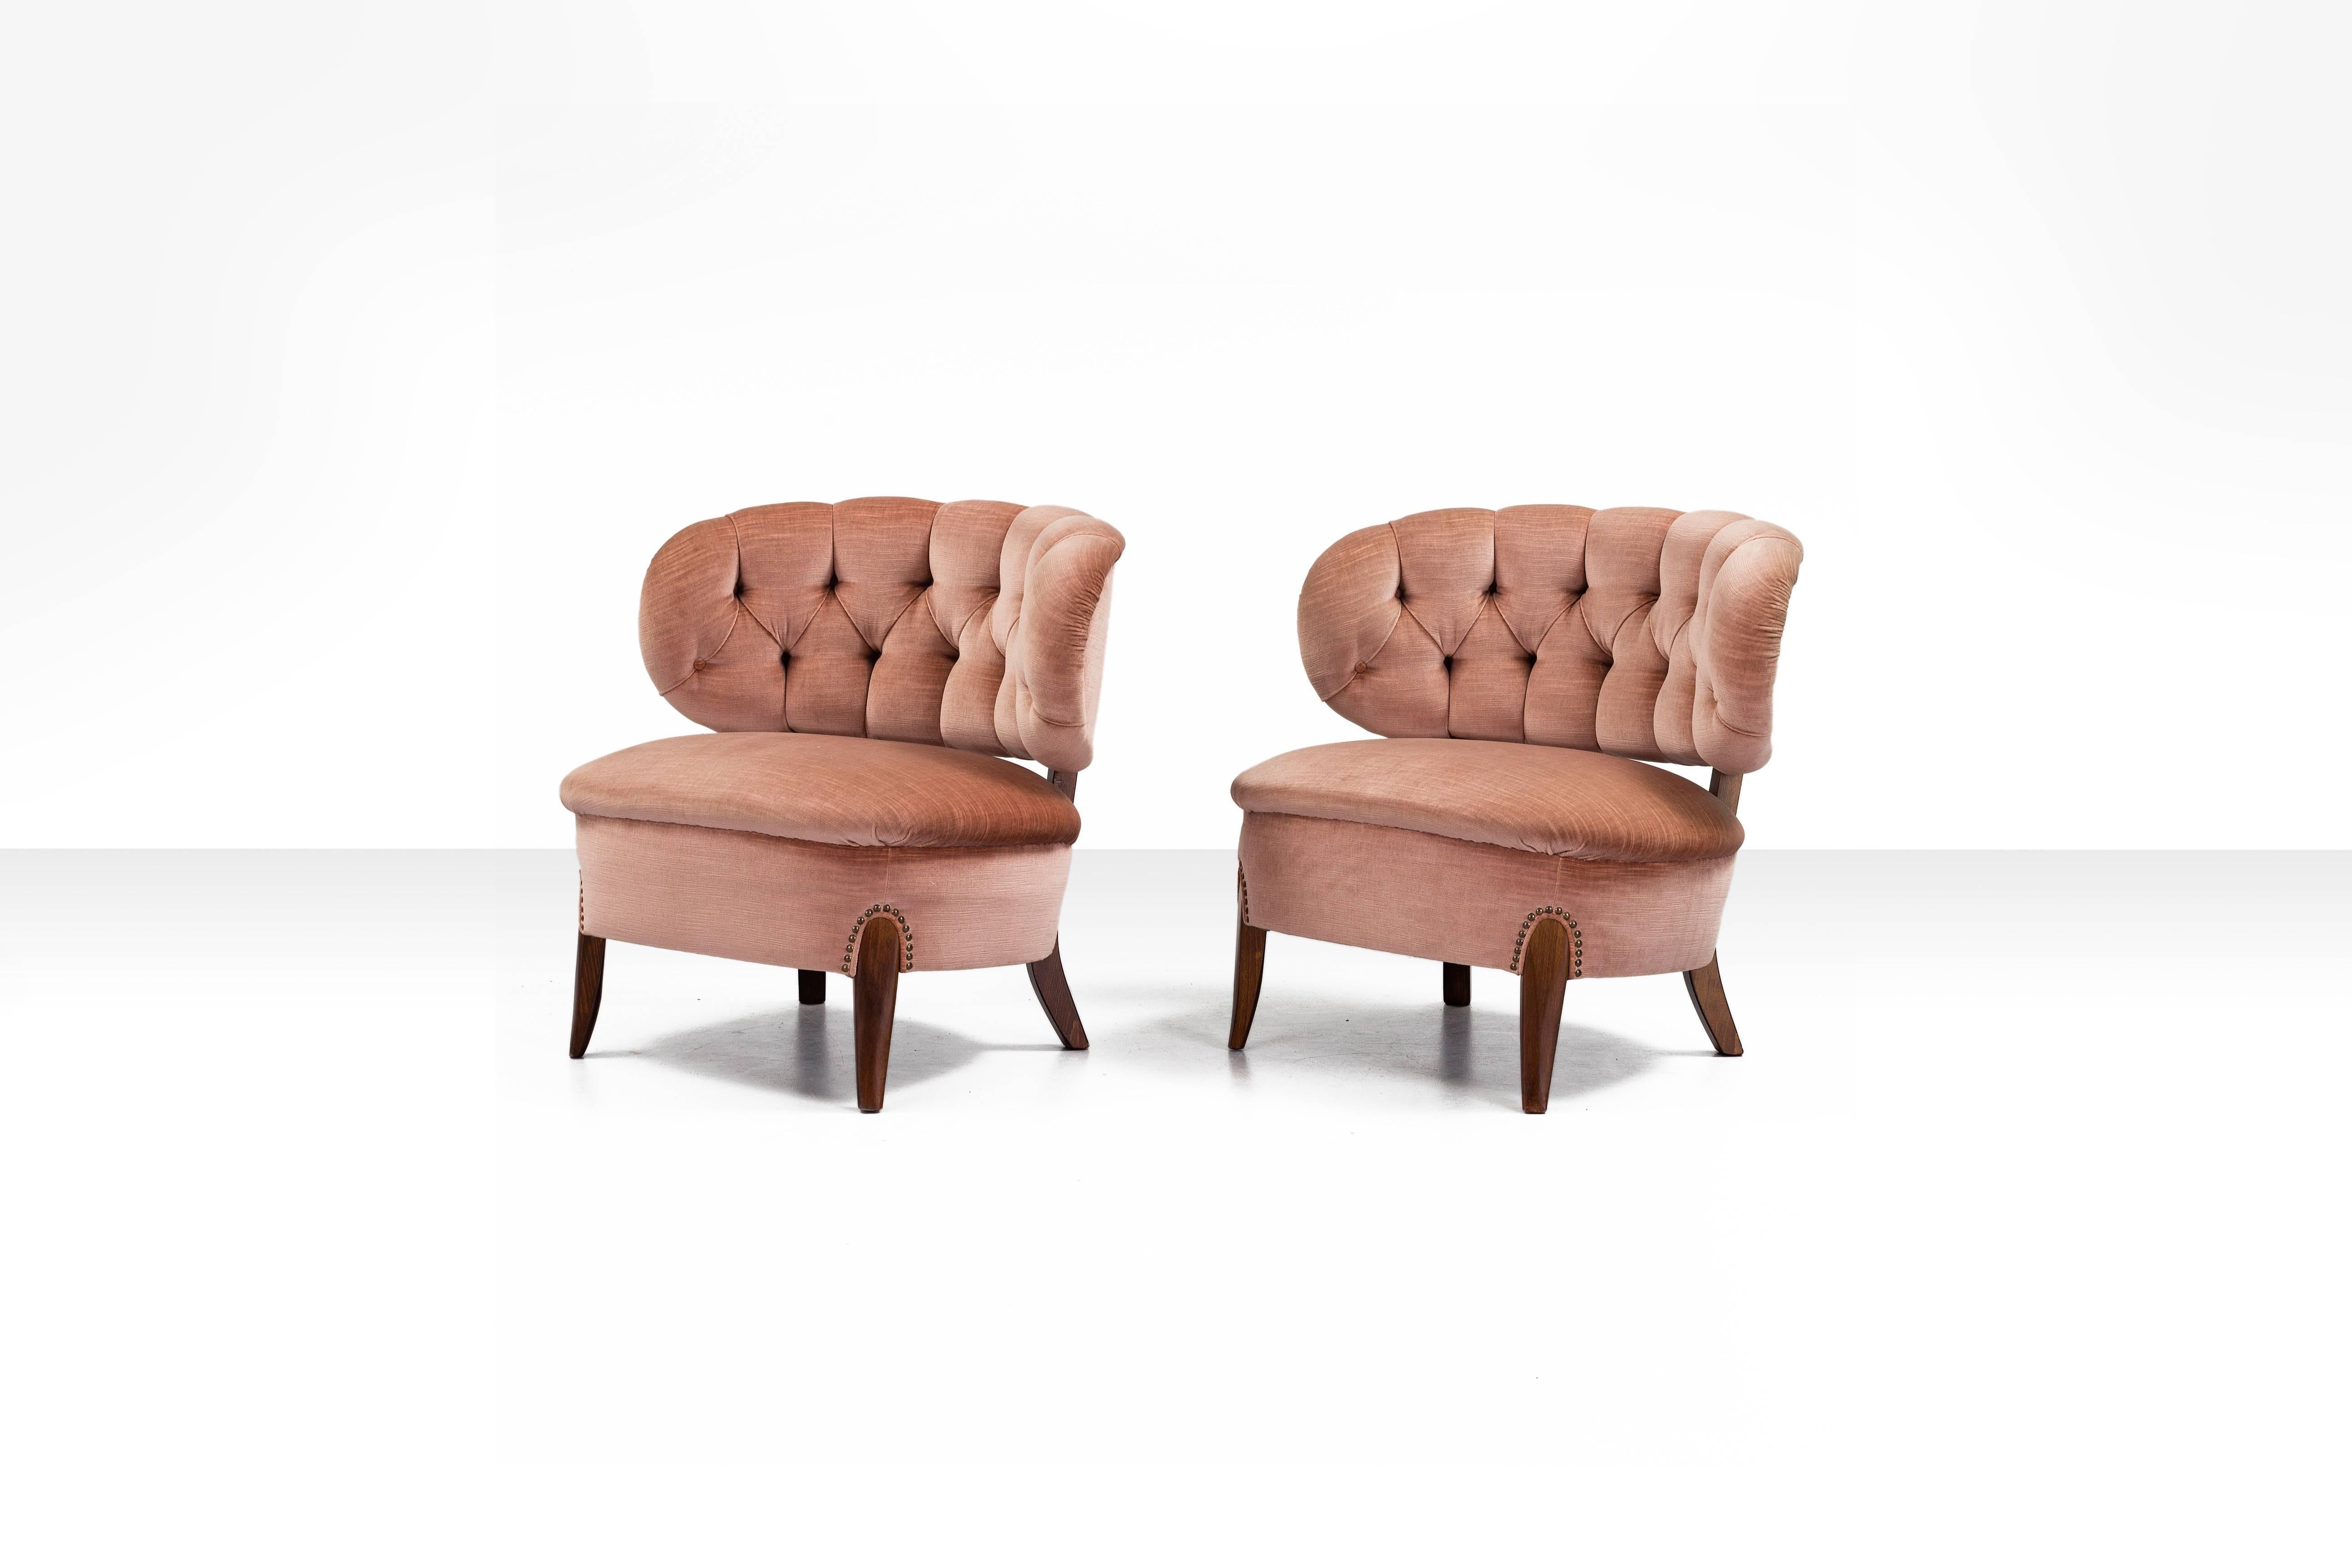 Pair of beautiful 'Schulz' easy chairs by Otto Schulz for Jio Möbler Jönköping, Sweden 1950s

Designed circa 1936, the first models of this chair where produced by Otto Schulz' own company, Boet. In 1941 however the production was transferred to the